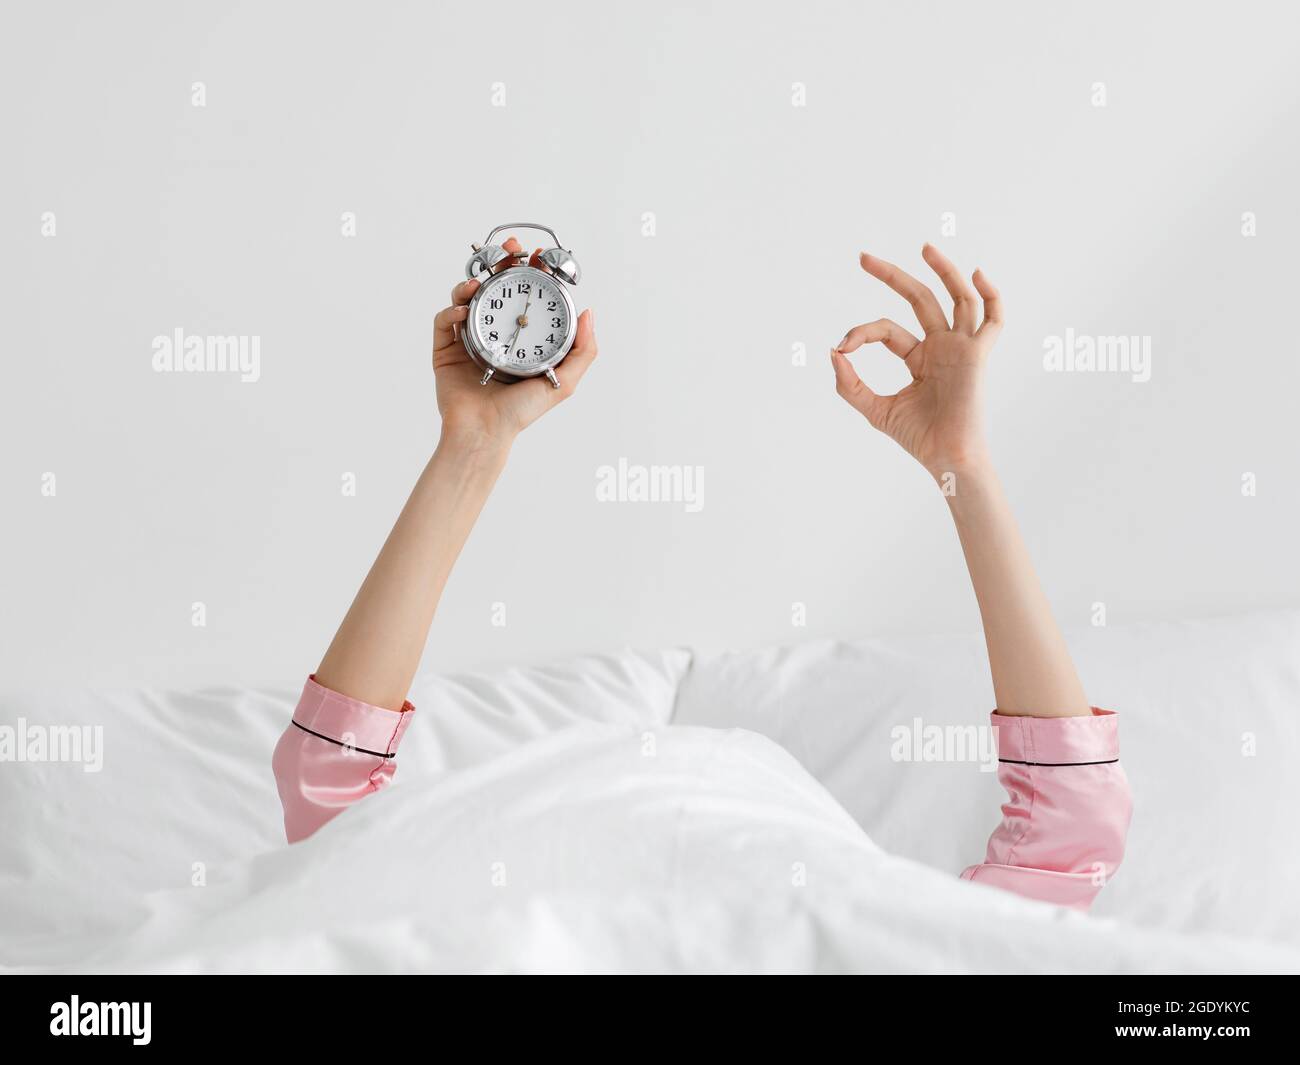 Healthy sleep, wake up on time, great rest, start to work and good morning Stock Photo